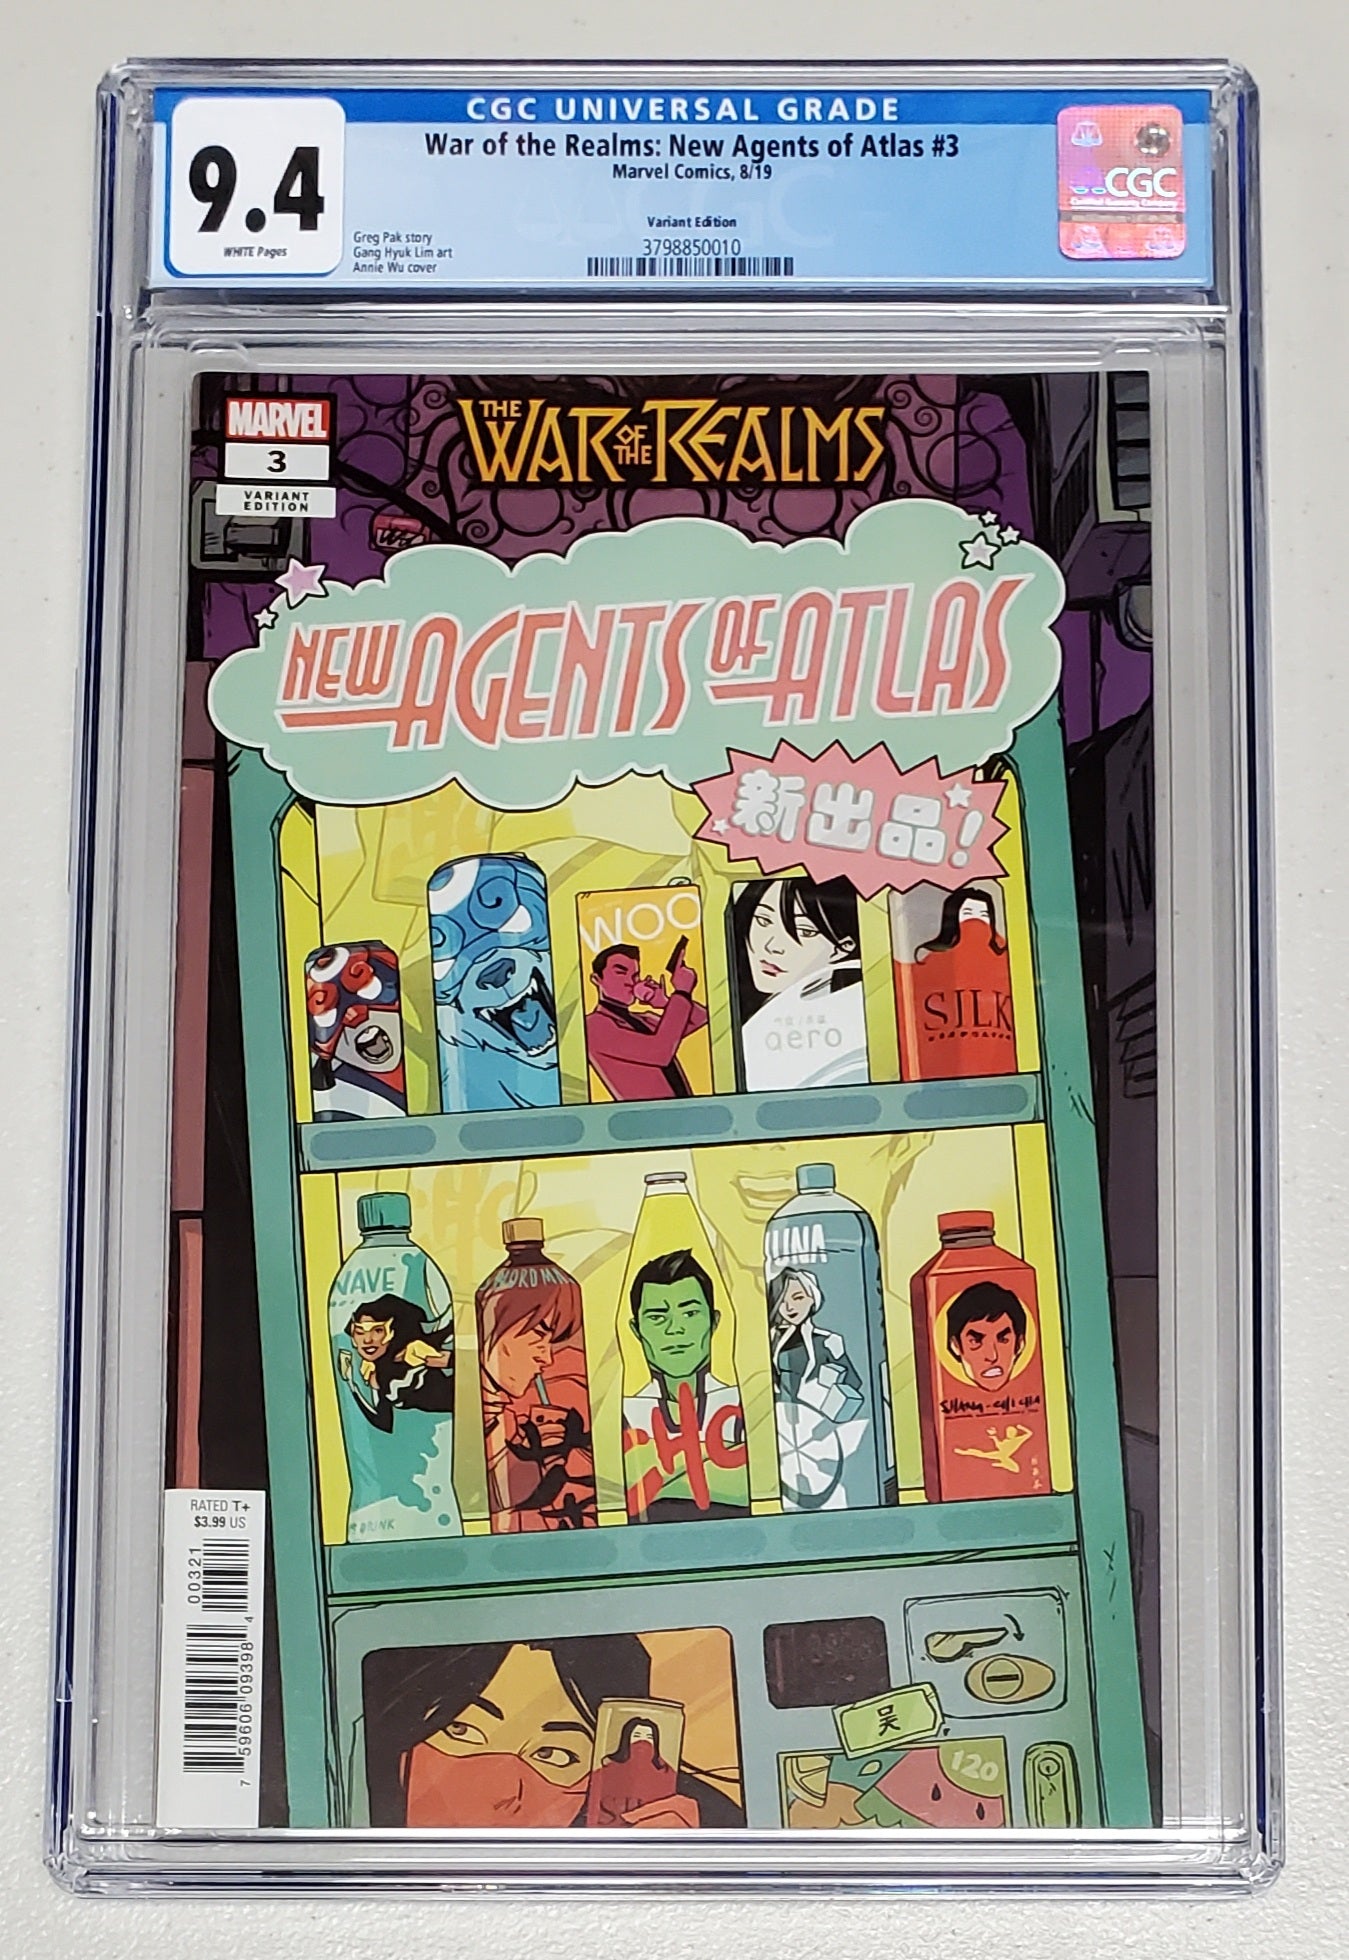 9.4 CGC WAR OF THE REALMS NEW AGENTS OF ATLAS #3 1:25 WU VARIANT [3798850010]